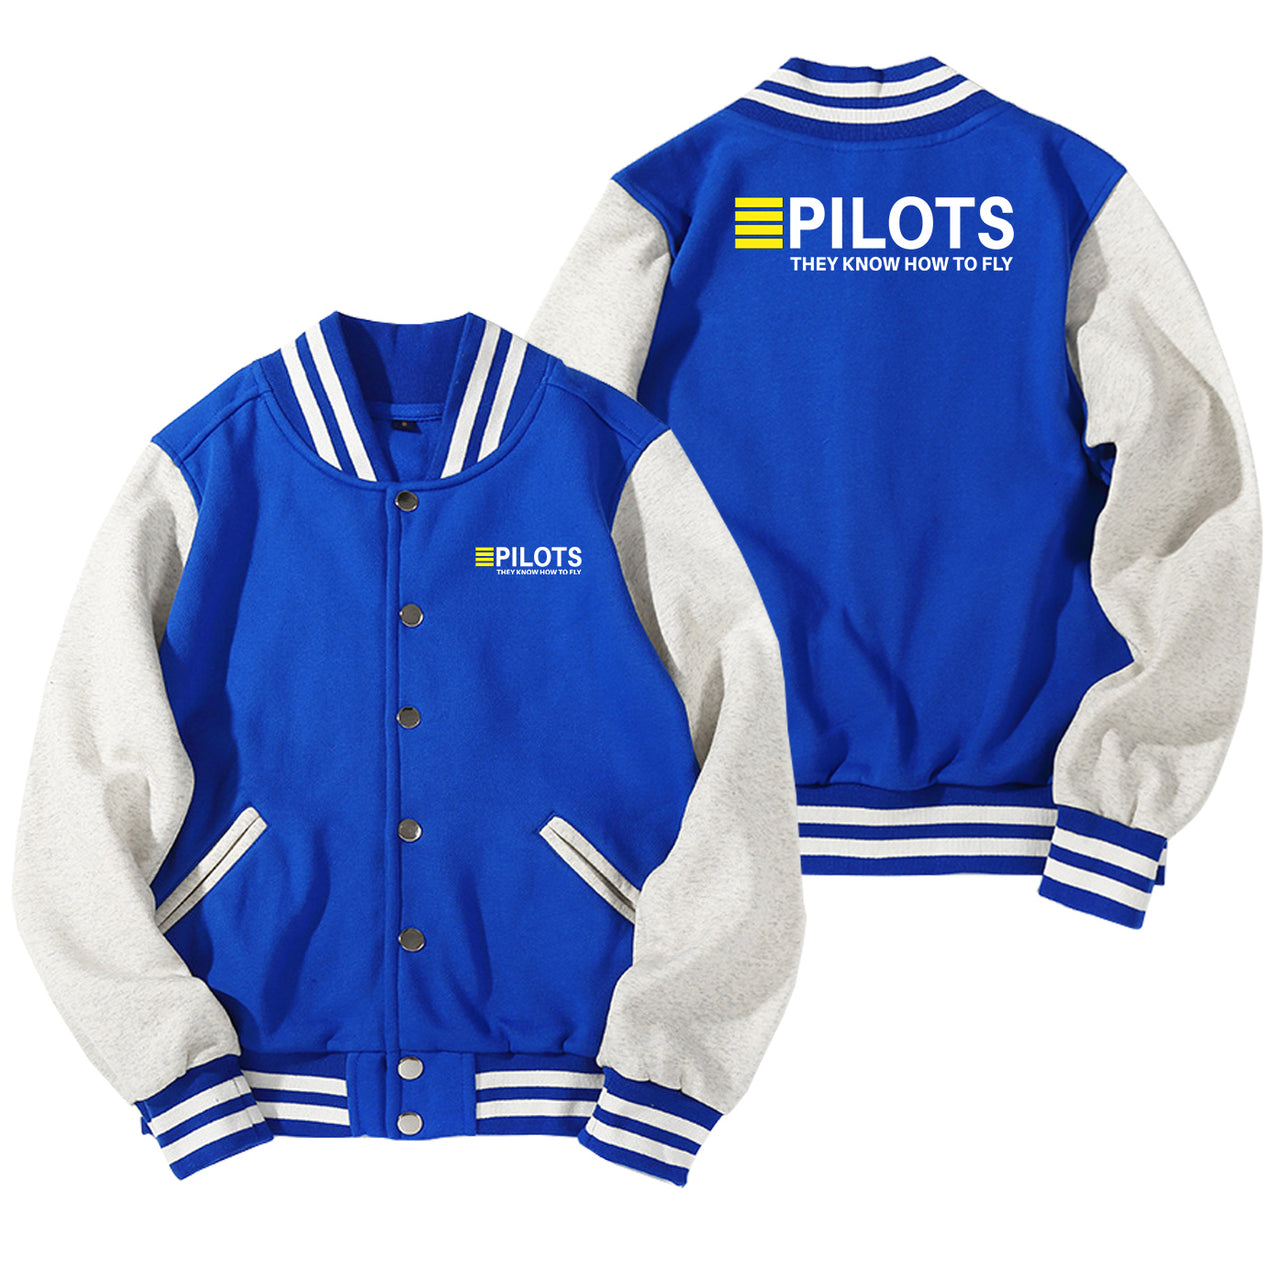 Pilots They Know How To Fly Designed Baseball Style Jackets